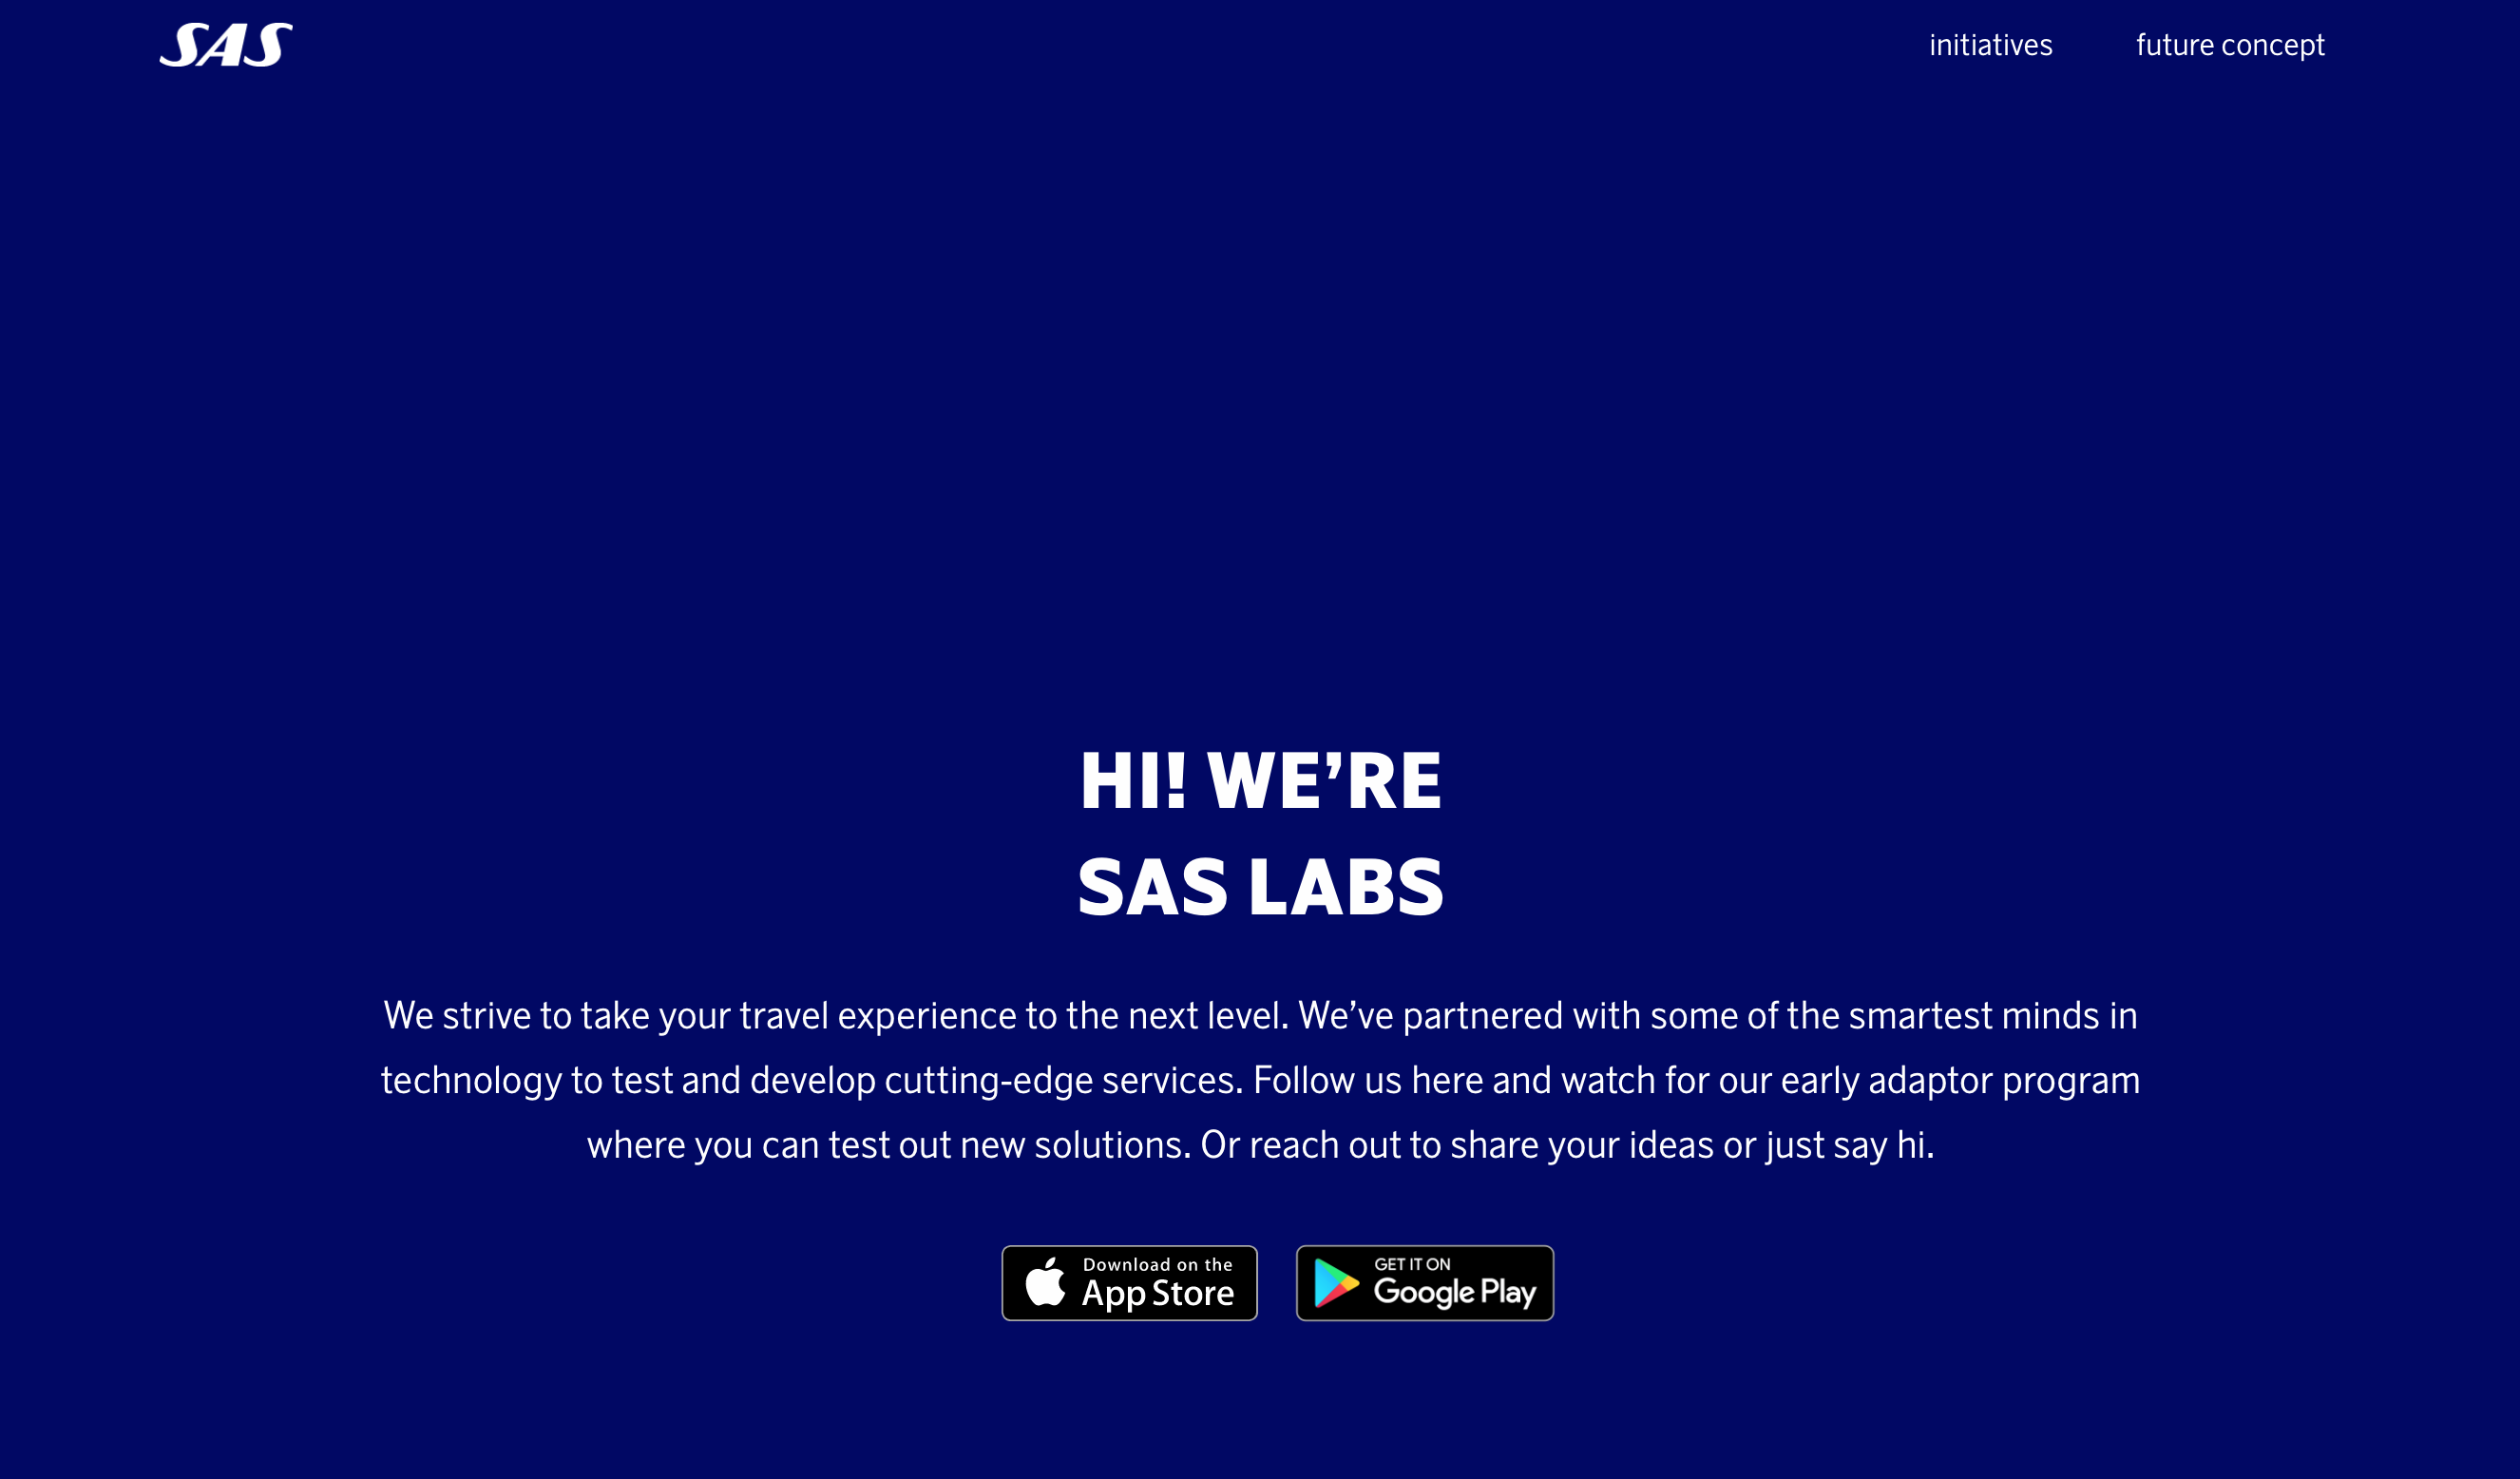 A new innovation portal developed by the Swedish Airline